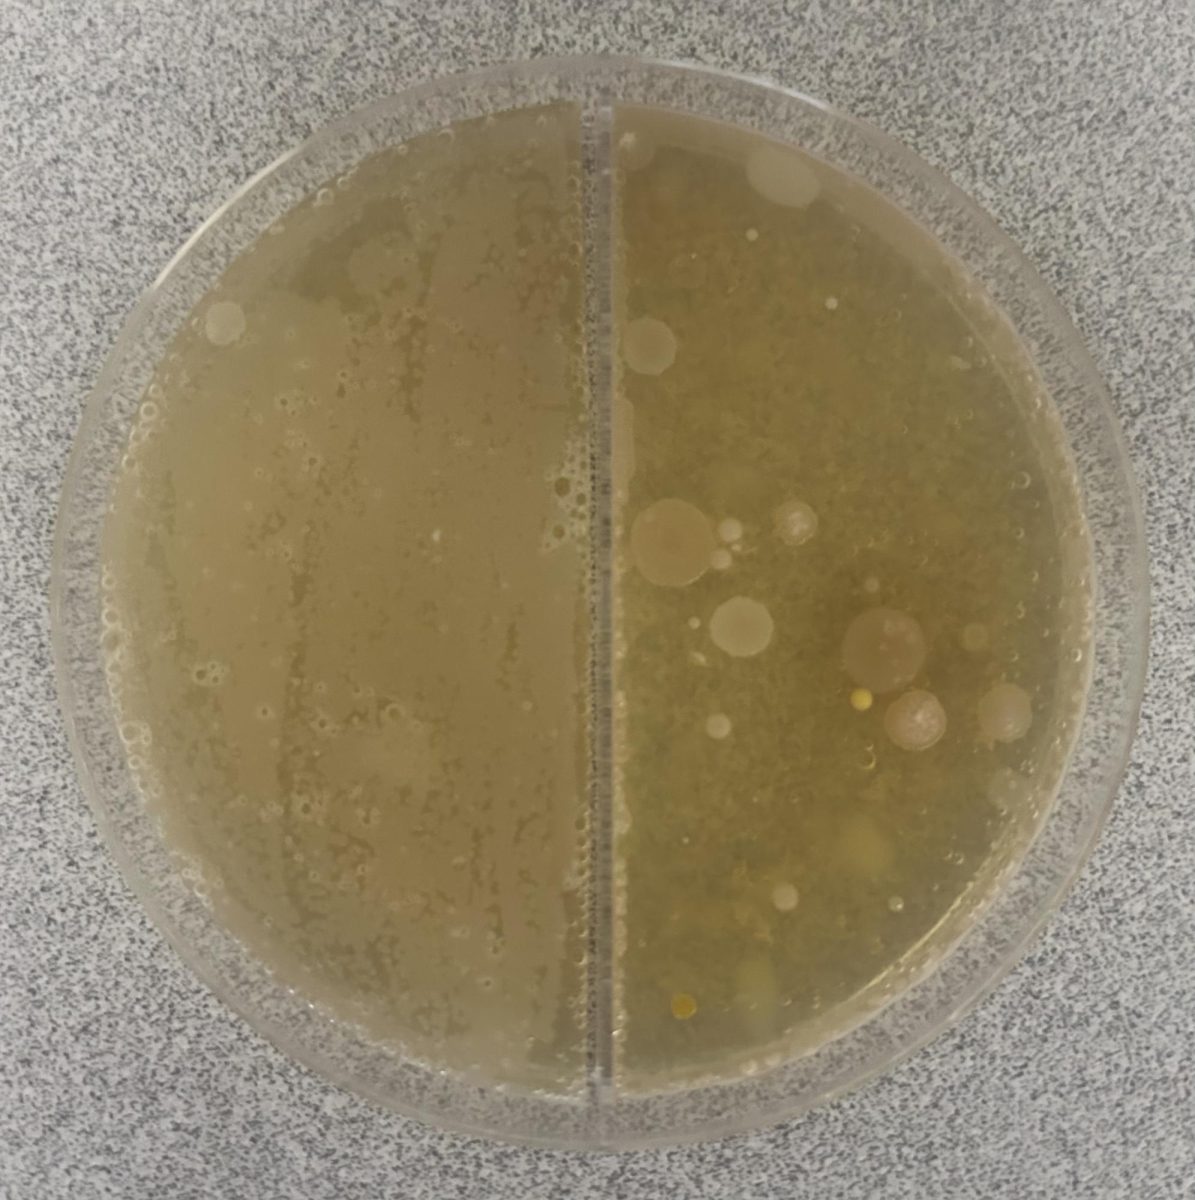 Petri dish of Test 8, 7 days after incubation. Very little bacterial growth. 